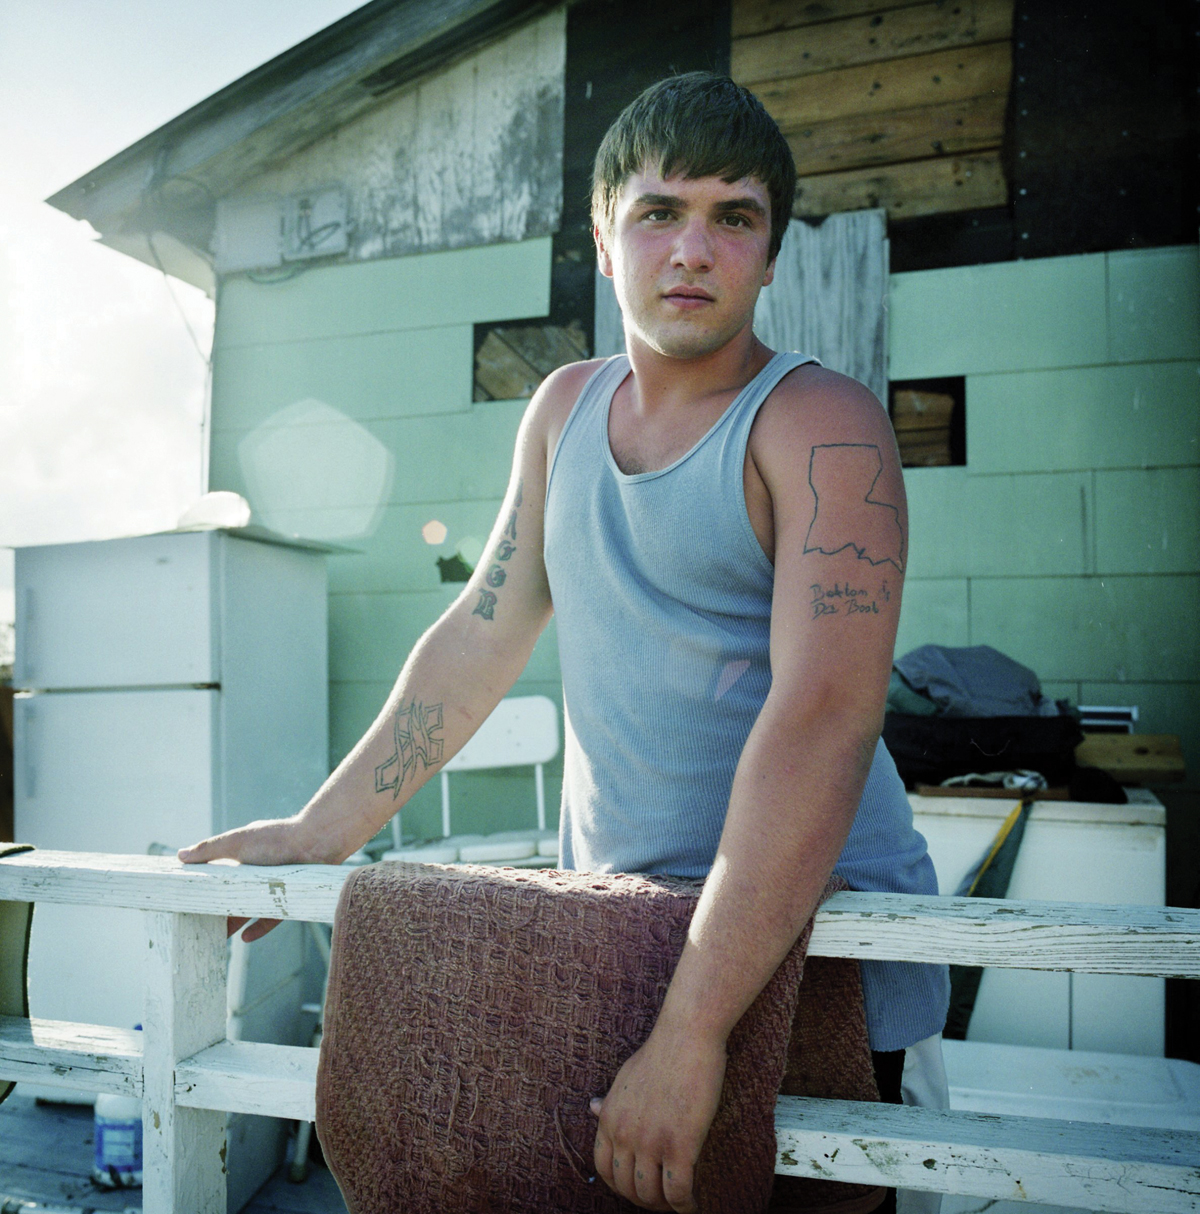 A man in a blue tank top stands at the railing of a porch; tattoos on his arm include the state of Louisiana and the phrase "Bottom of the Boot."